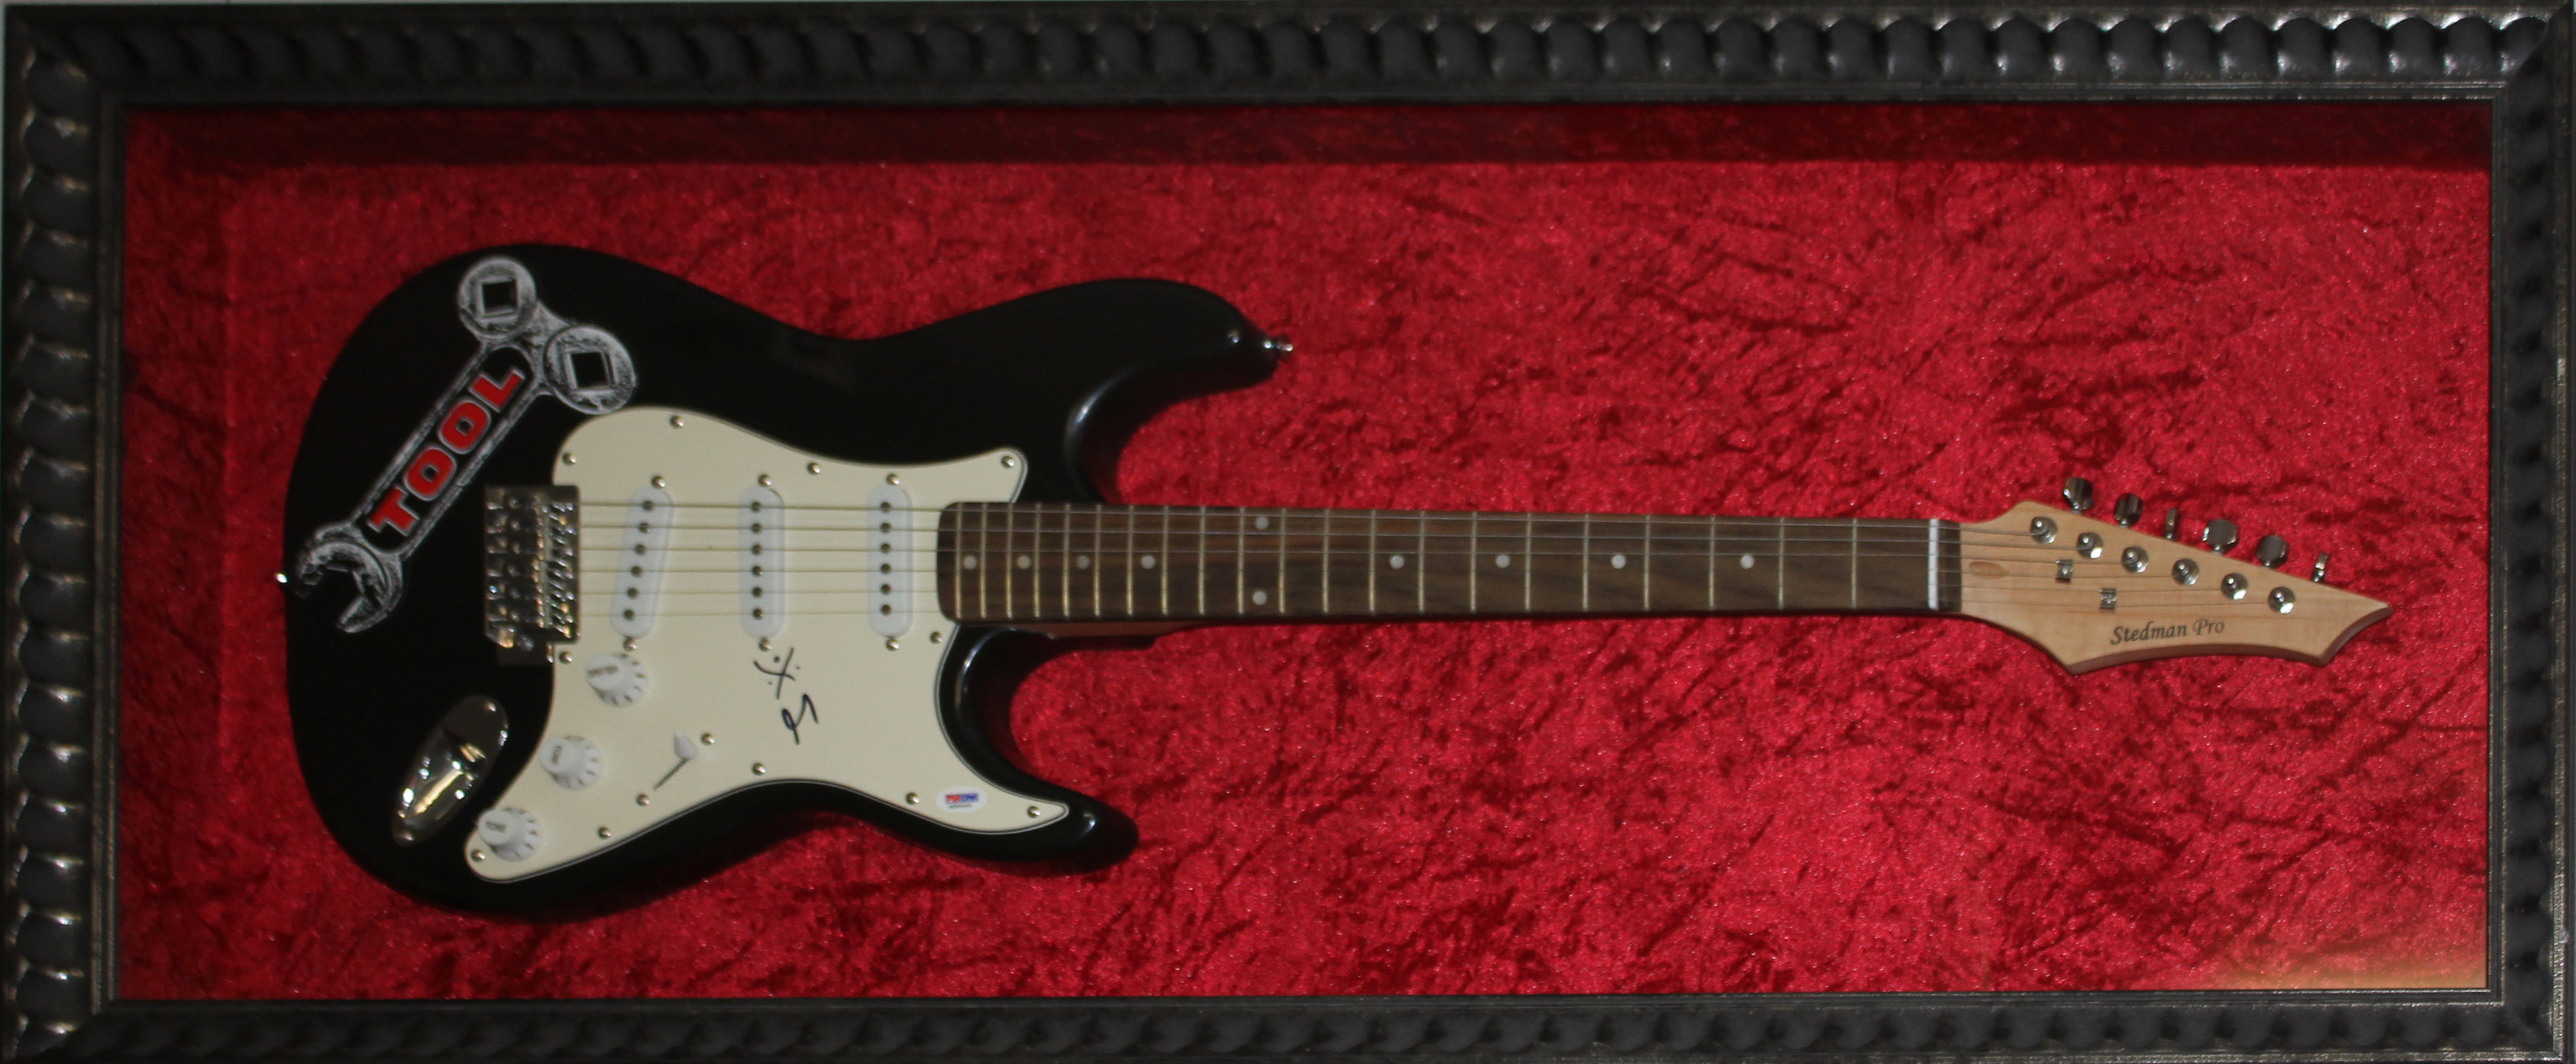 A STEDMAN PRO ELECTRIC GUITAR SIGNED BY MAYNARD JAMES KEENEN OF TOOL Complete with tamper-evident